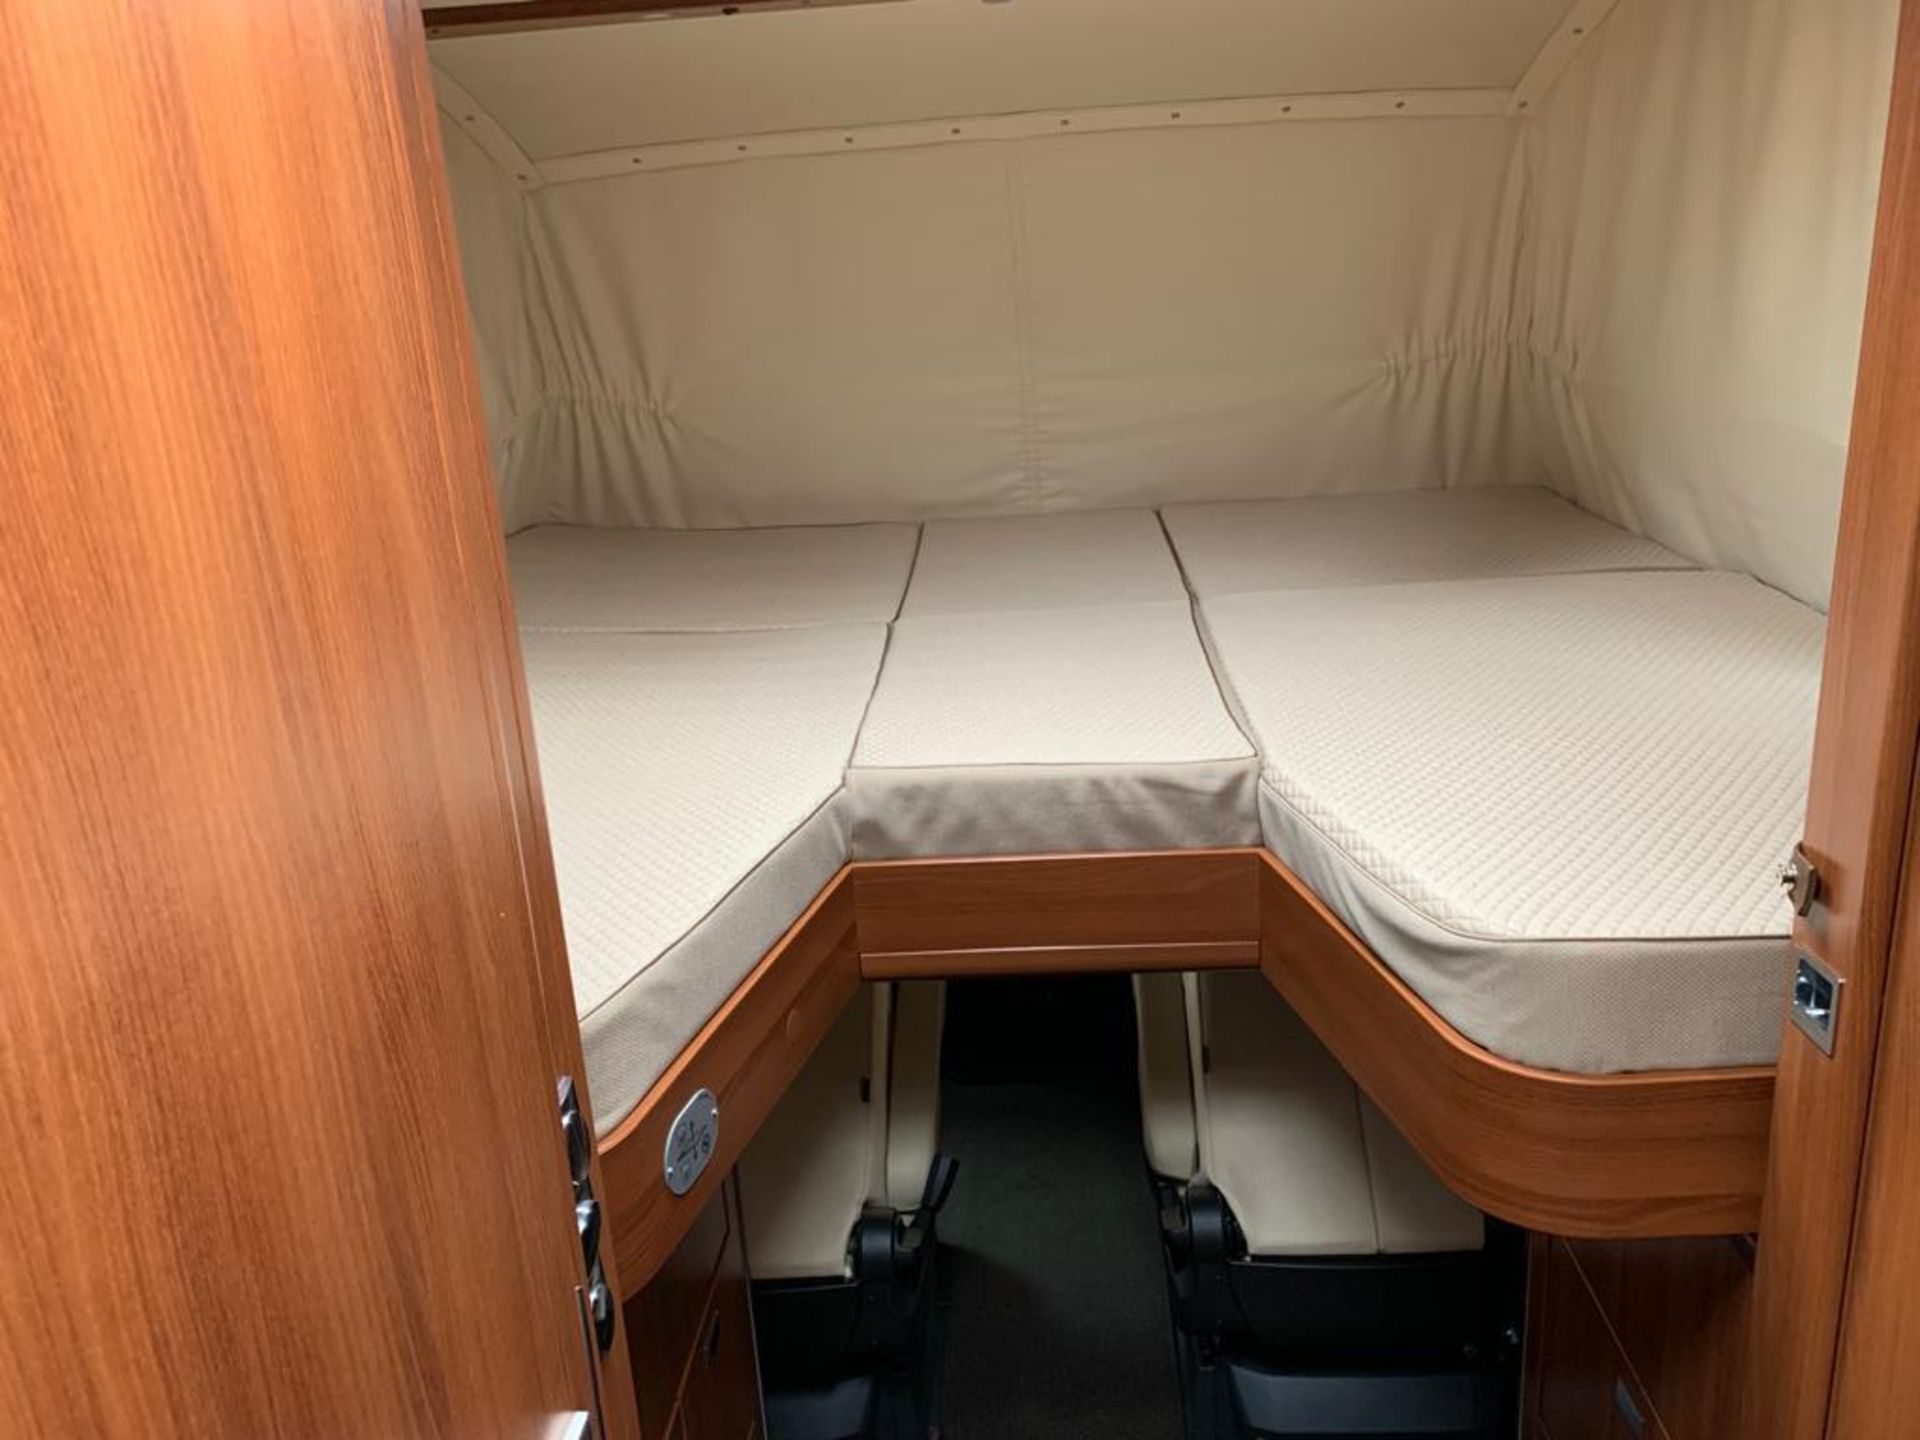 2020 CARTHAGO LINER-FOR-TWO 53L MOTORHOME 11 mths WARRANTY 4529 MILES, MINT CONDITION NO VAT - Image 24 of 38